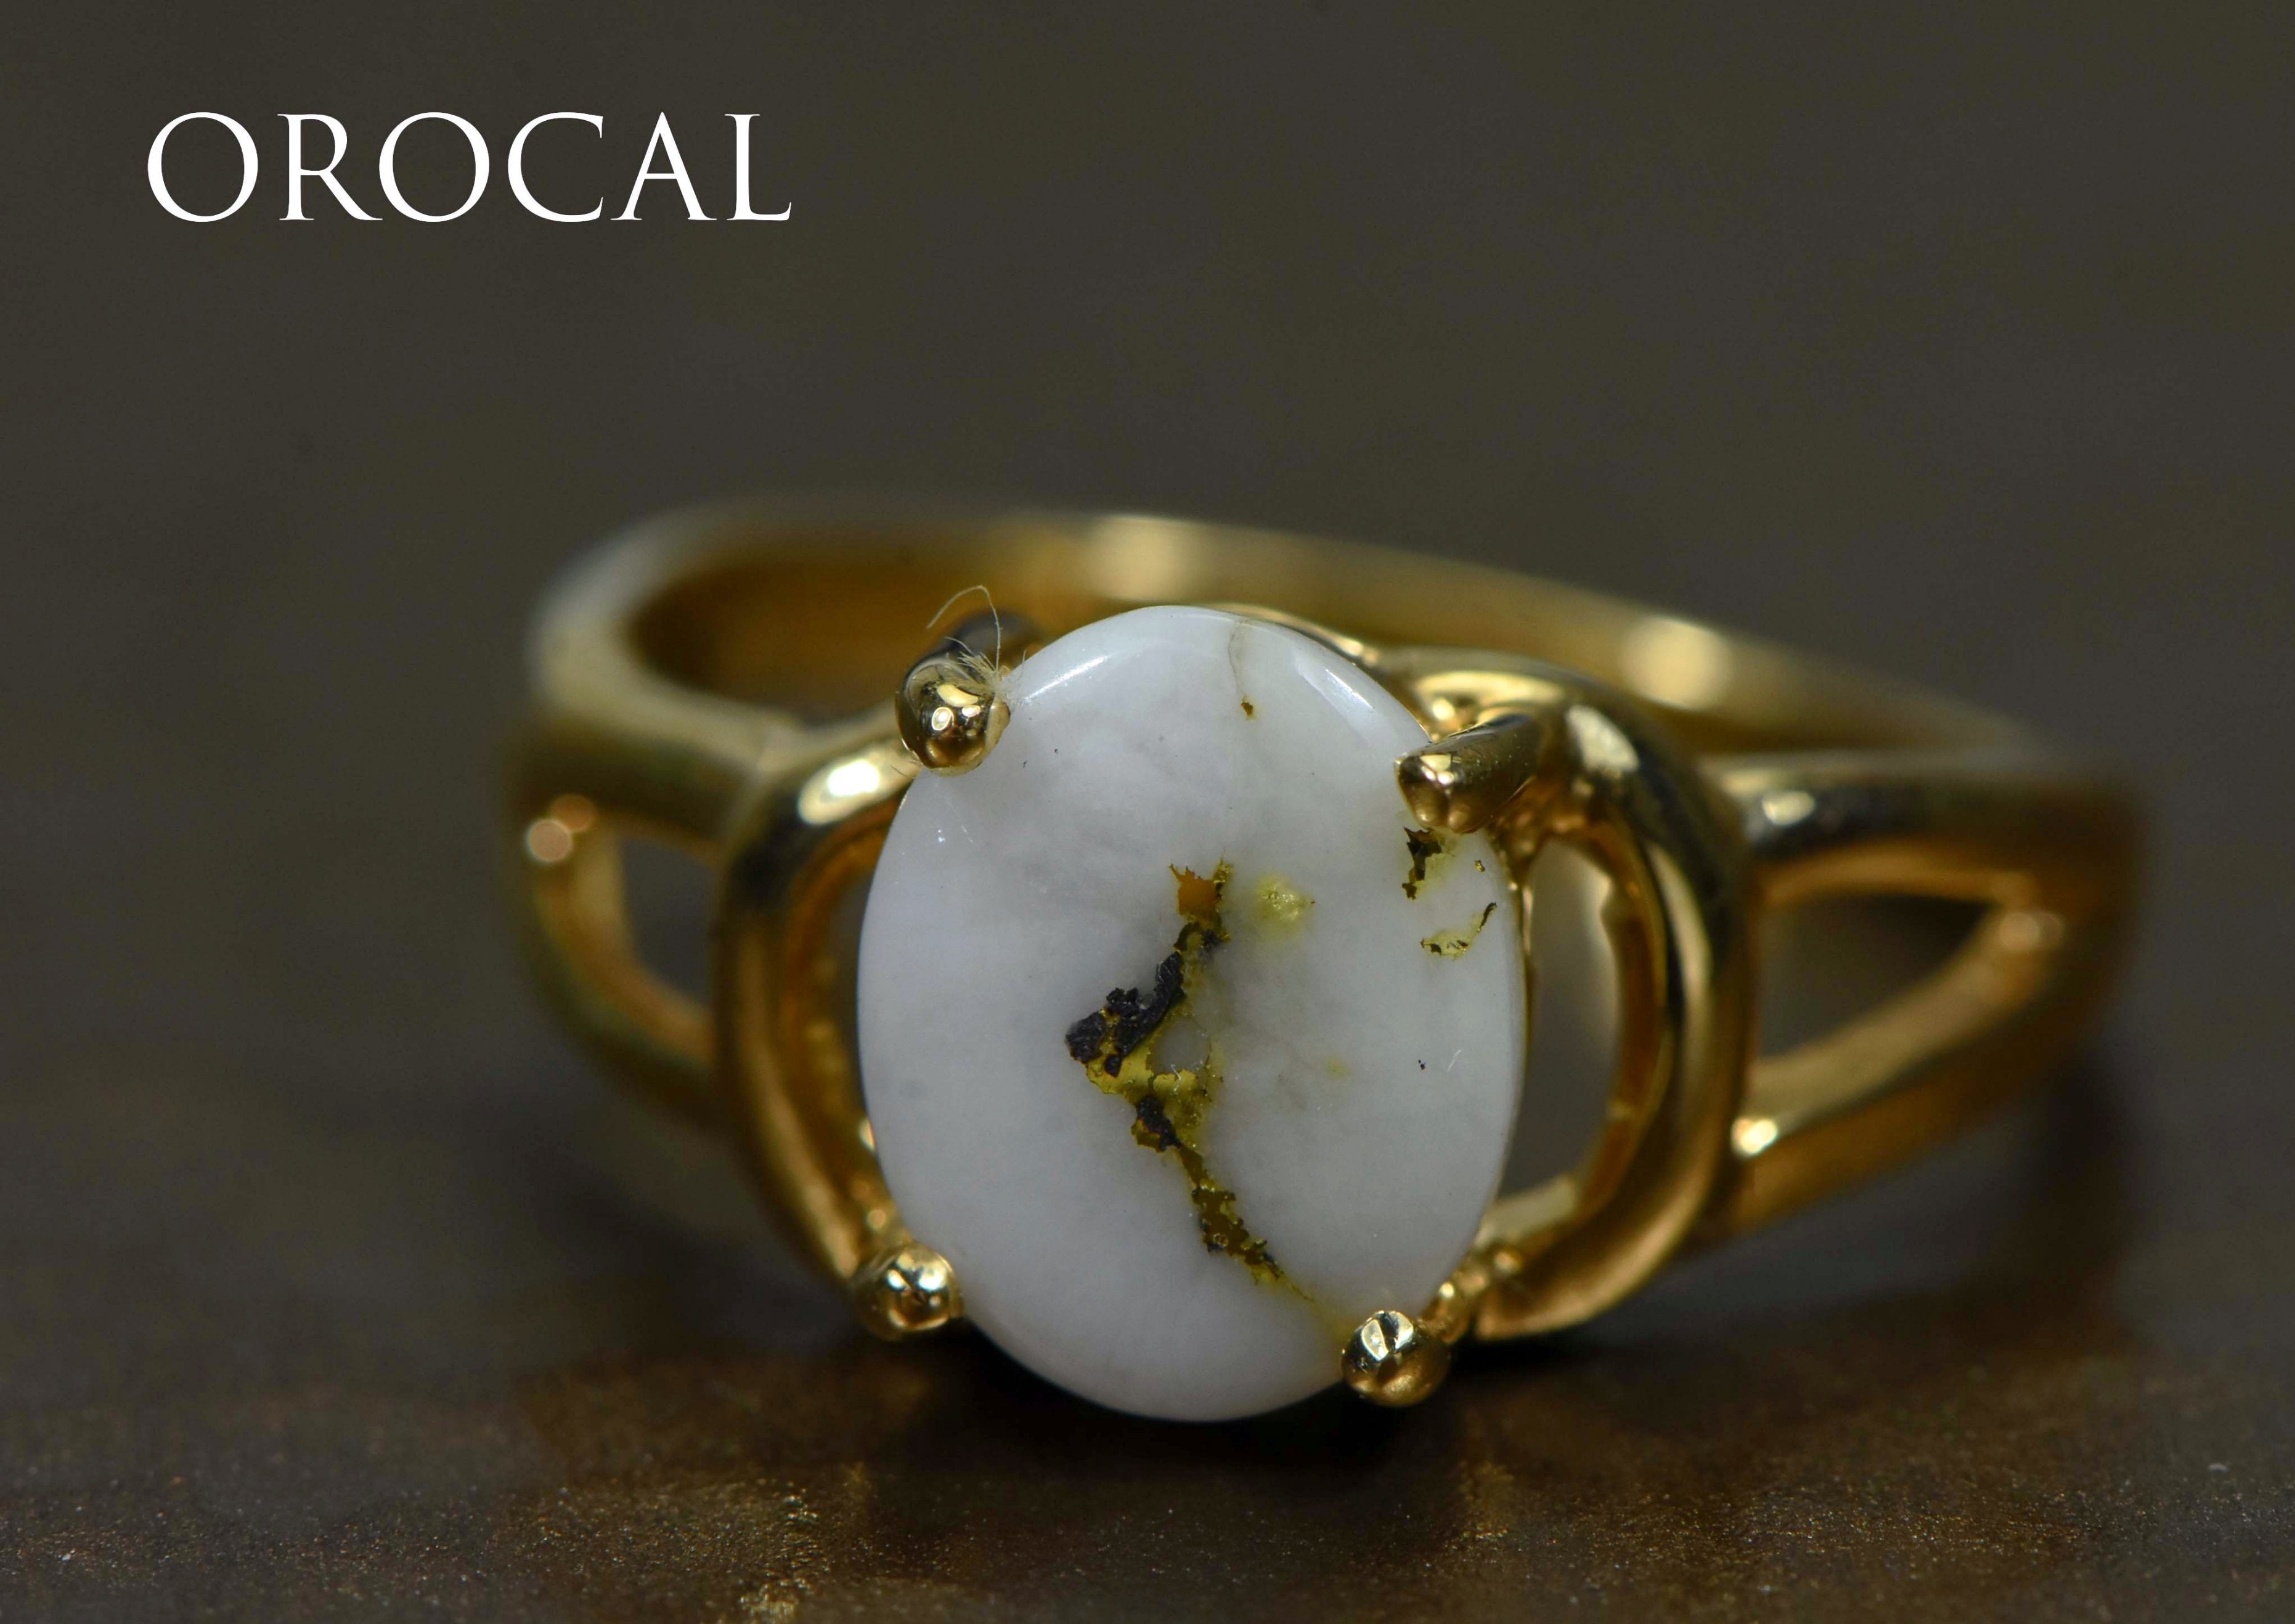 Gold Quartz Ring "Orocal" RL1023Q Genuine Hand Crafted Jewelry - 14K Gold Casting